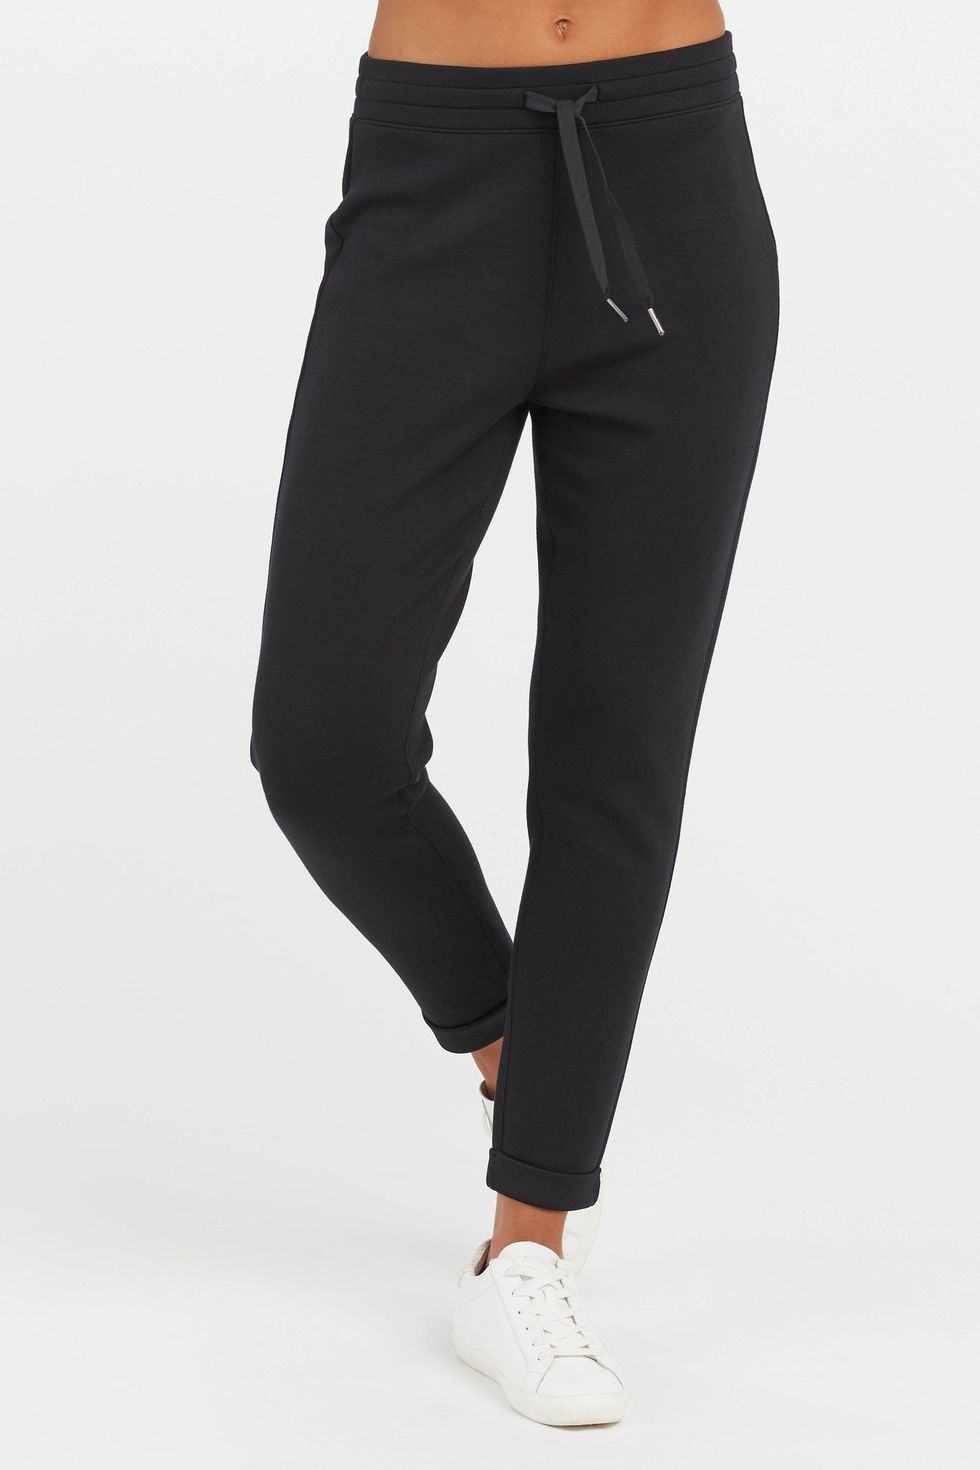 AirLuxe Tapered Pant